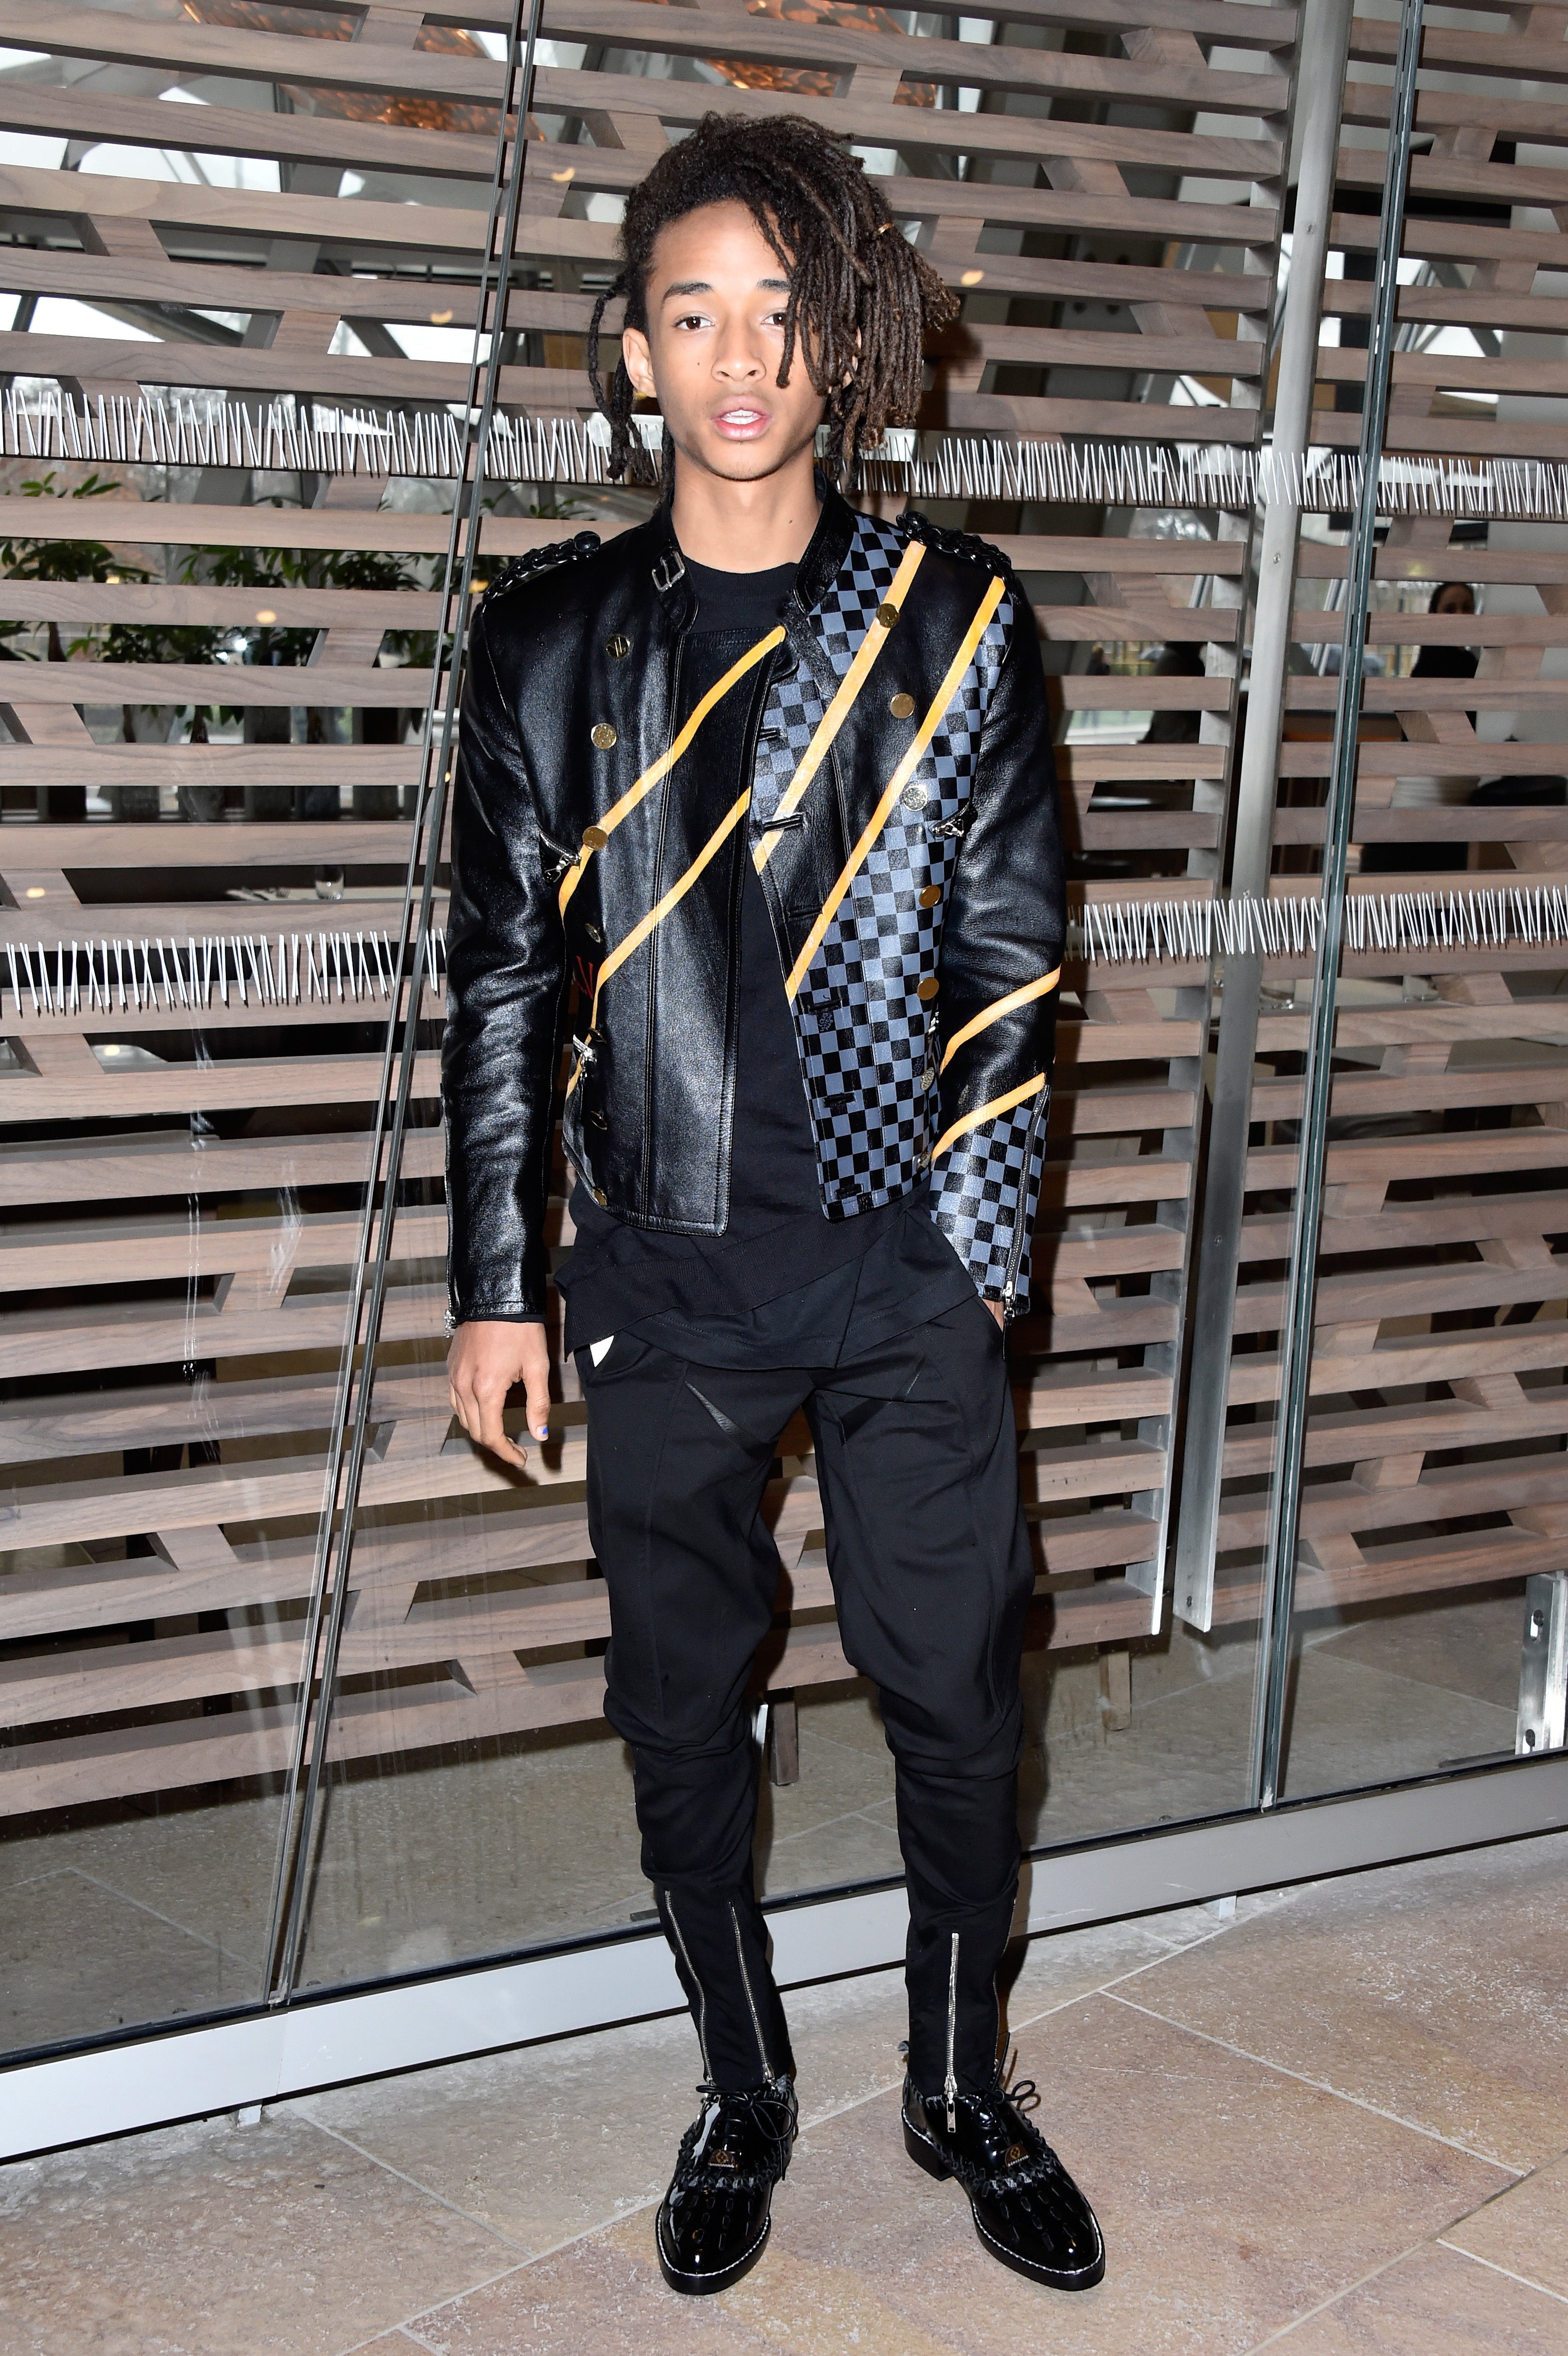 Jaden Smith on Fashion: 'I Don’t See Man Clothes and Woman Clothes'